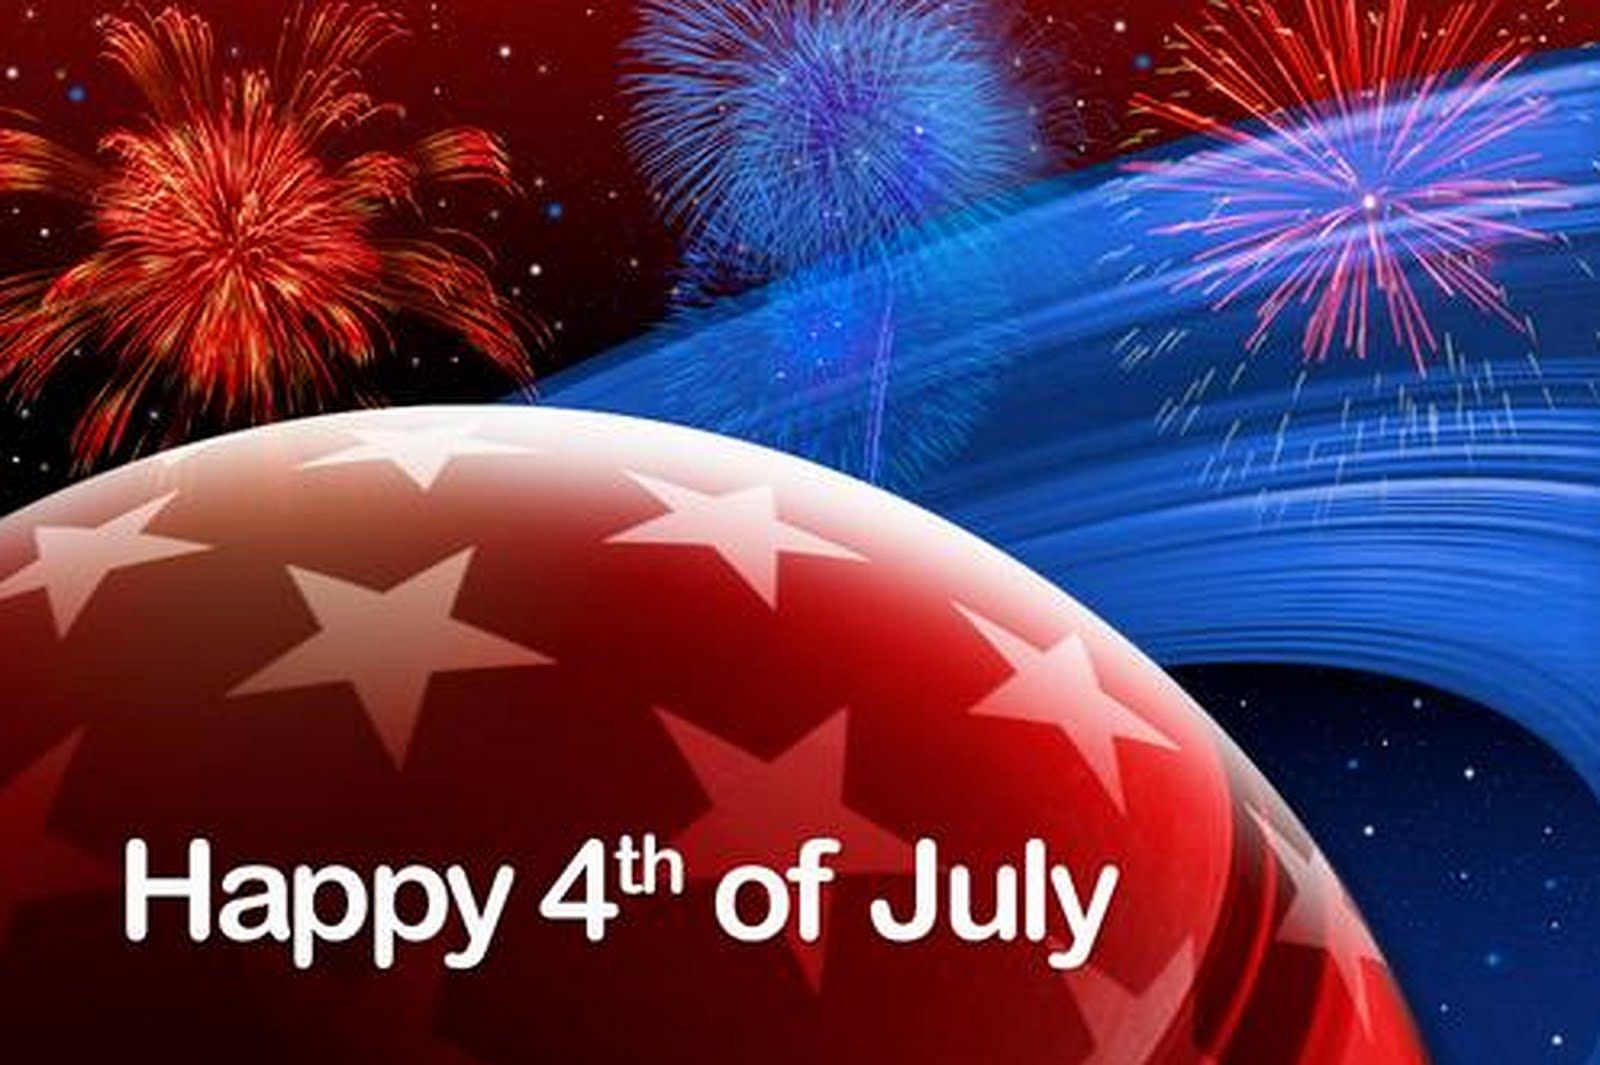 Happy 4th Of July Hd Wallpaper For Iphone - Happy 4th Of July 2019 - HD Wallpaper 